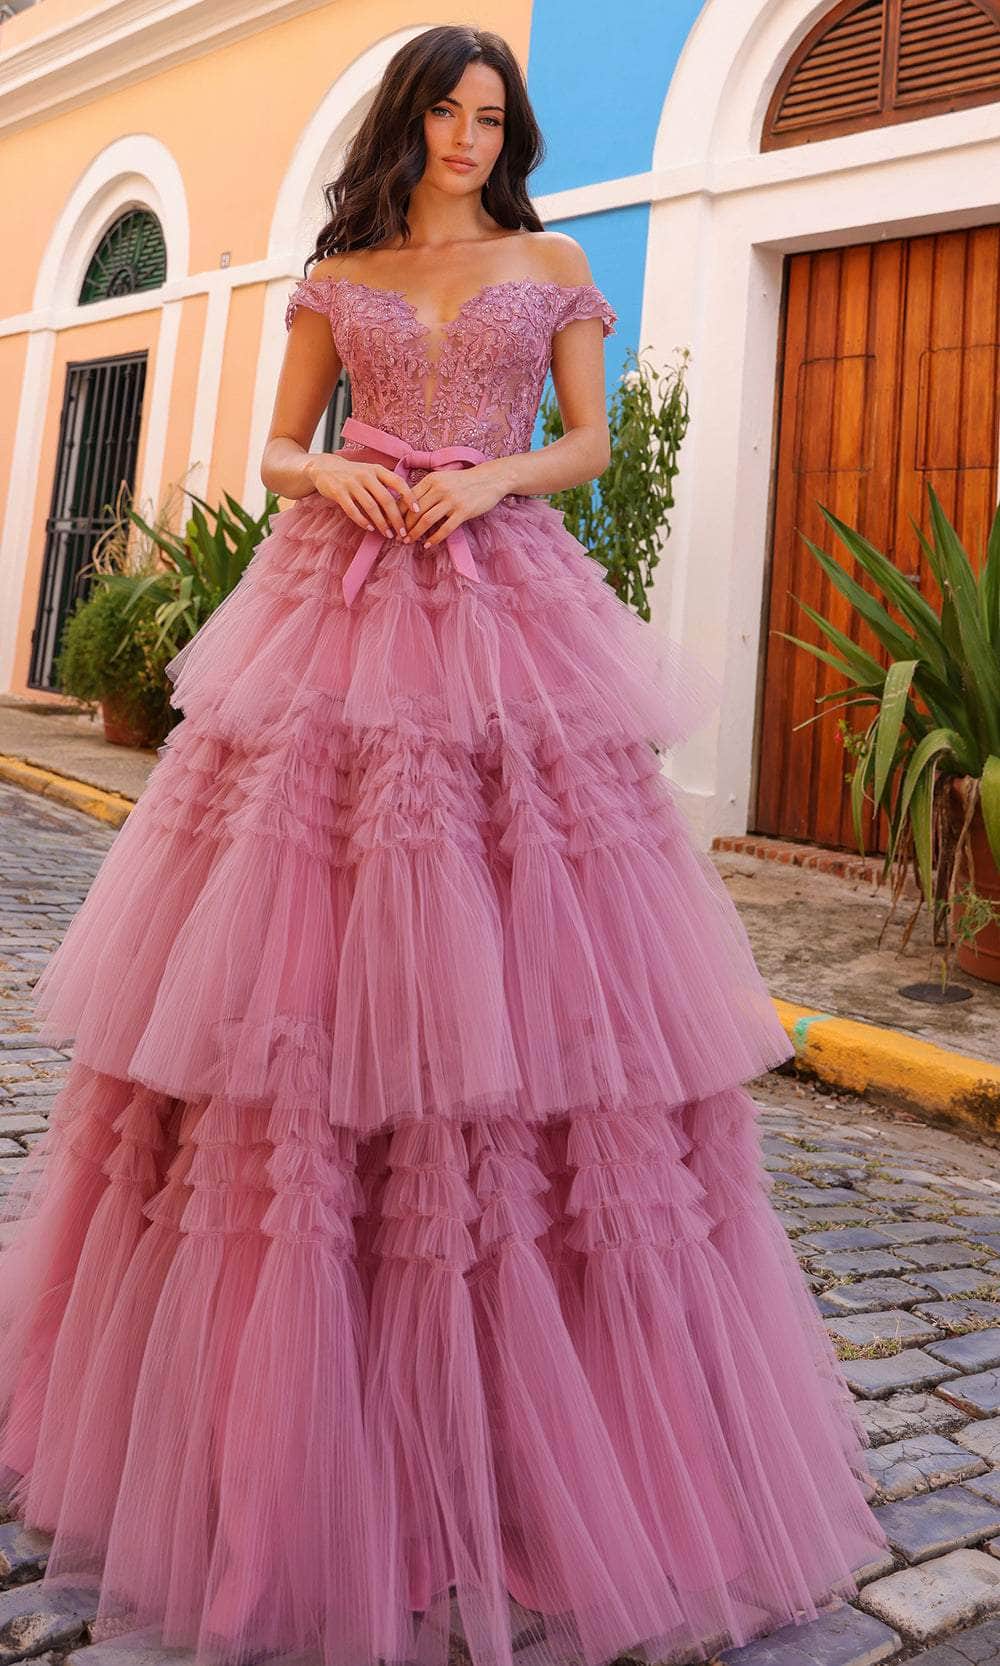 Nox Anabel E1293 - Off Shoulder Tiered Prom Dress Special Occasion Dress 0 / Mauve